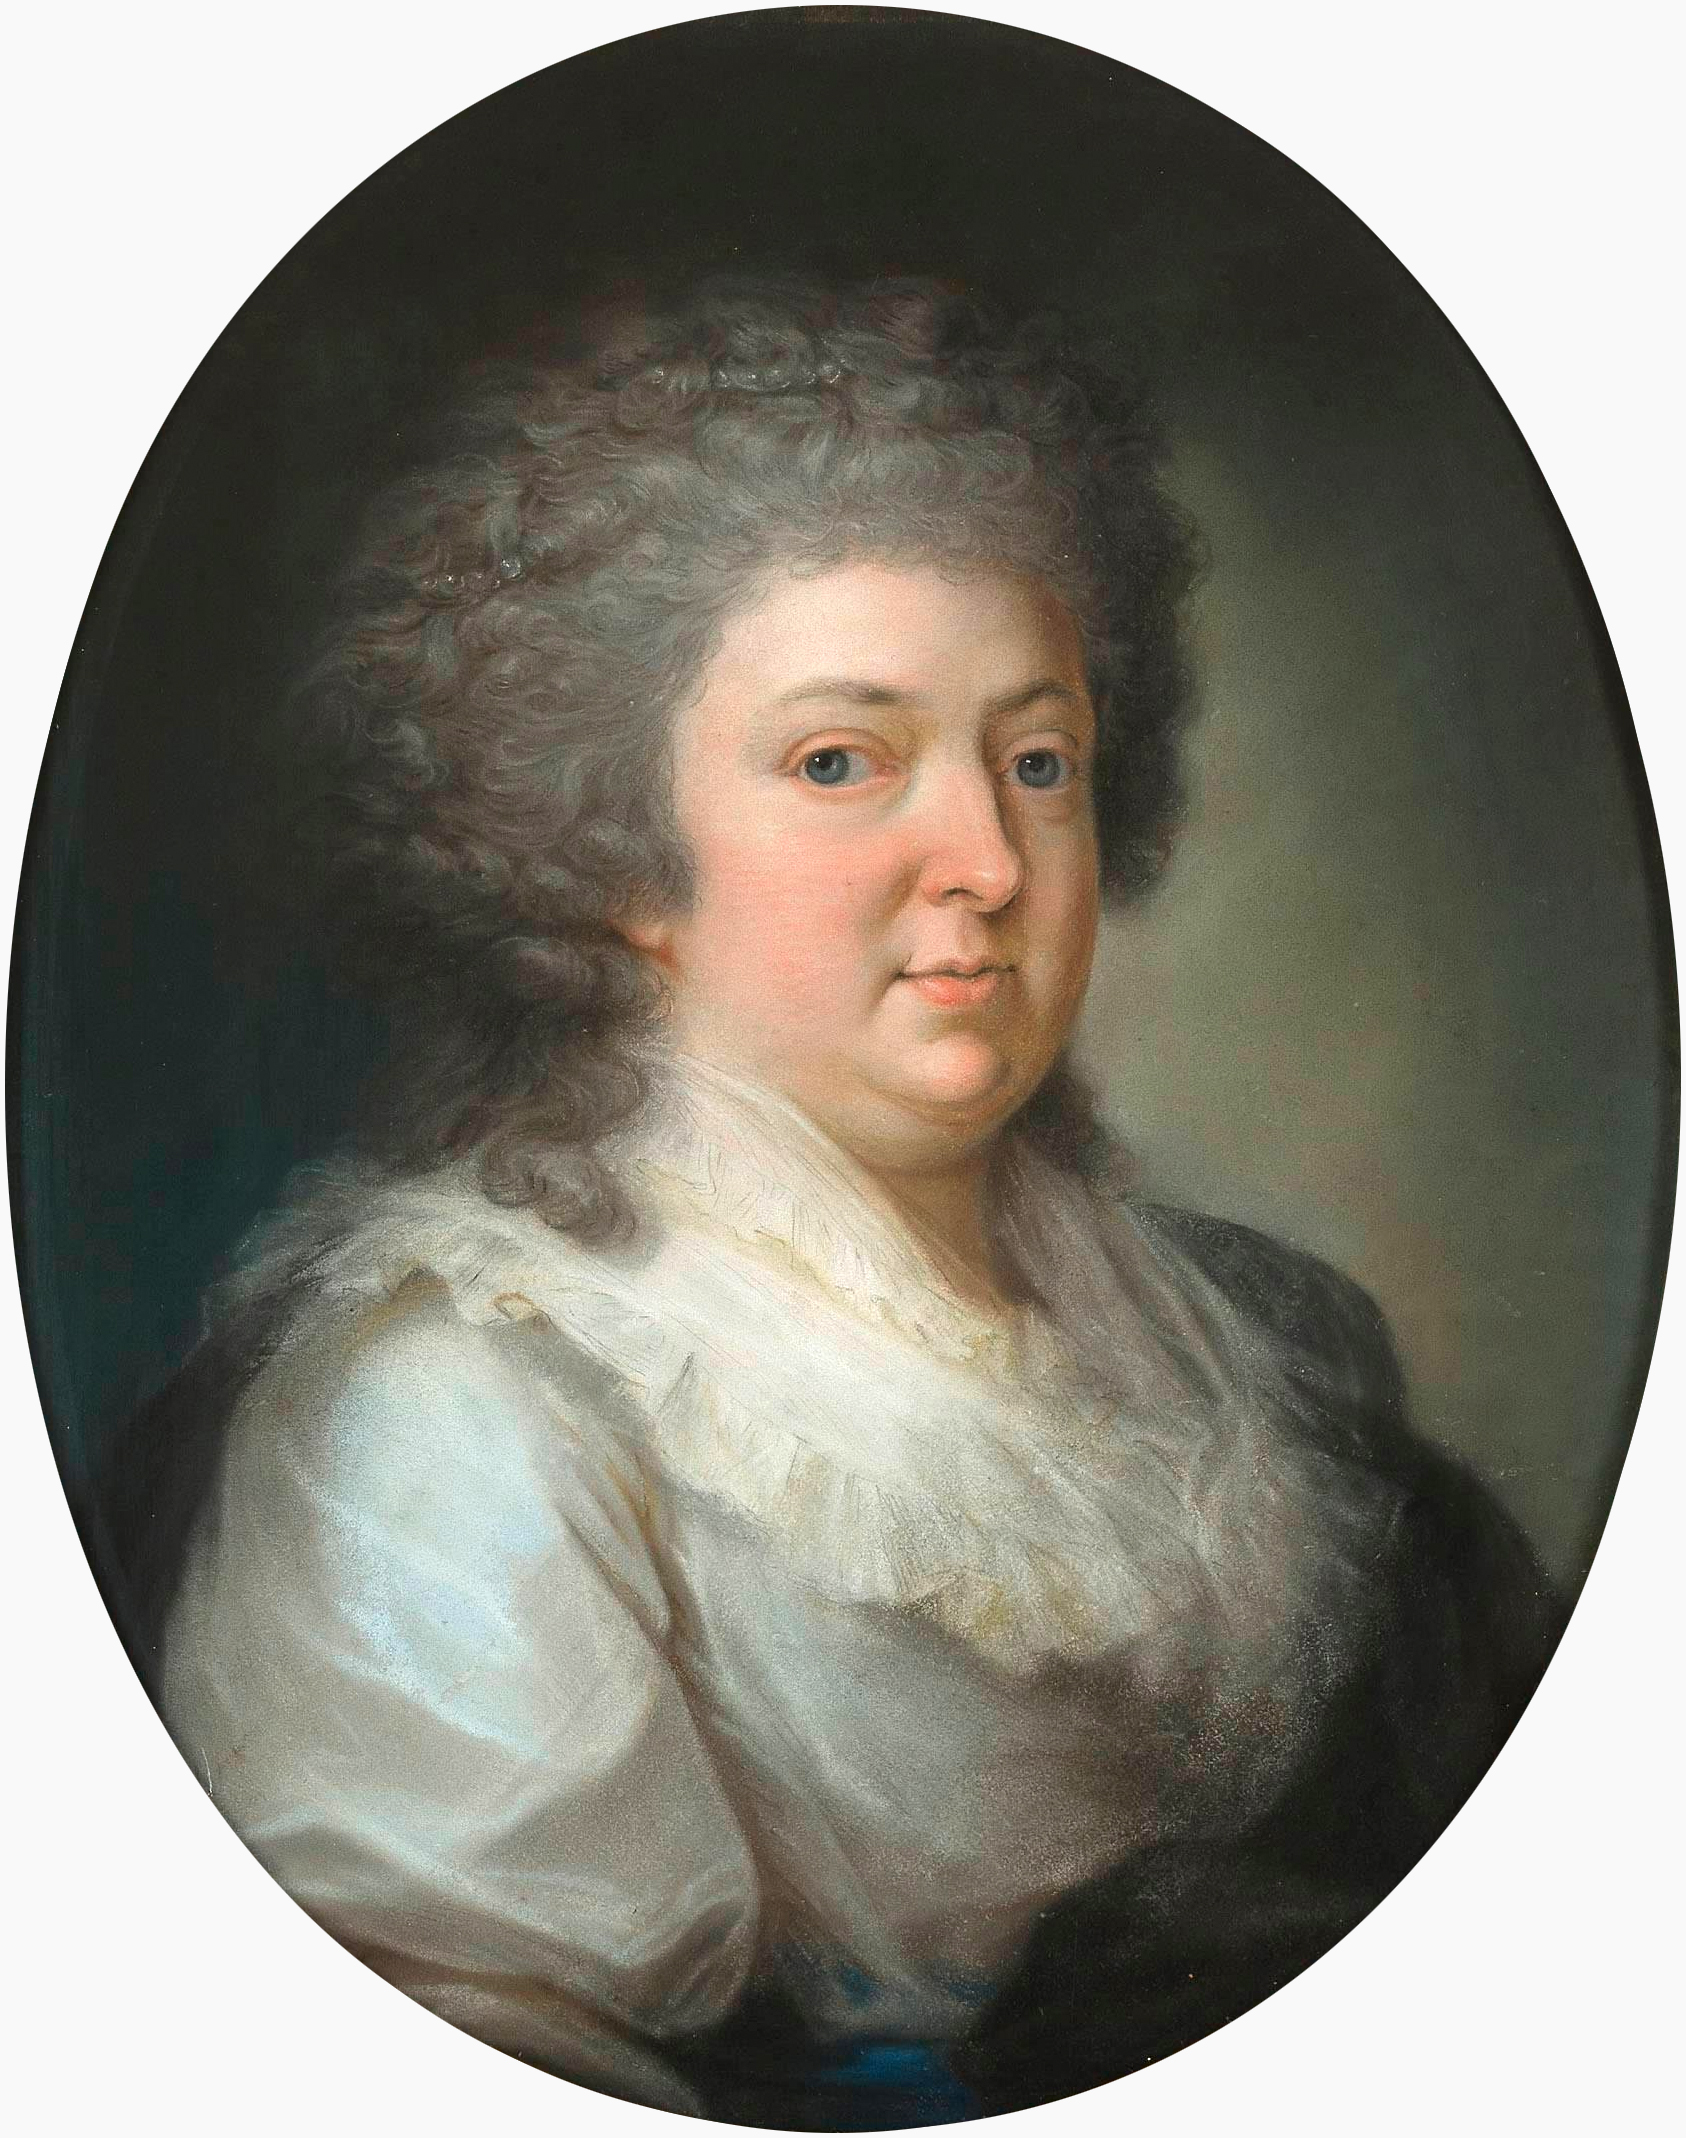 Painting of Frederica Charlotte Luise Riedesel circa 1795